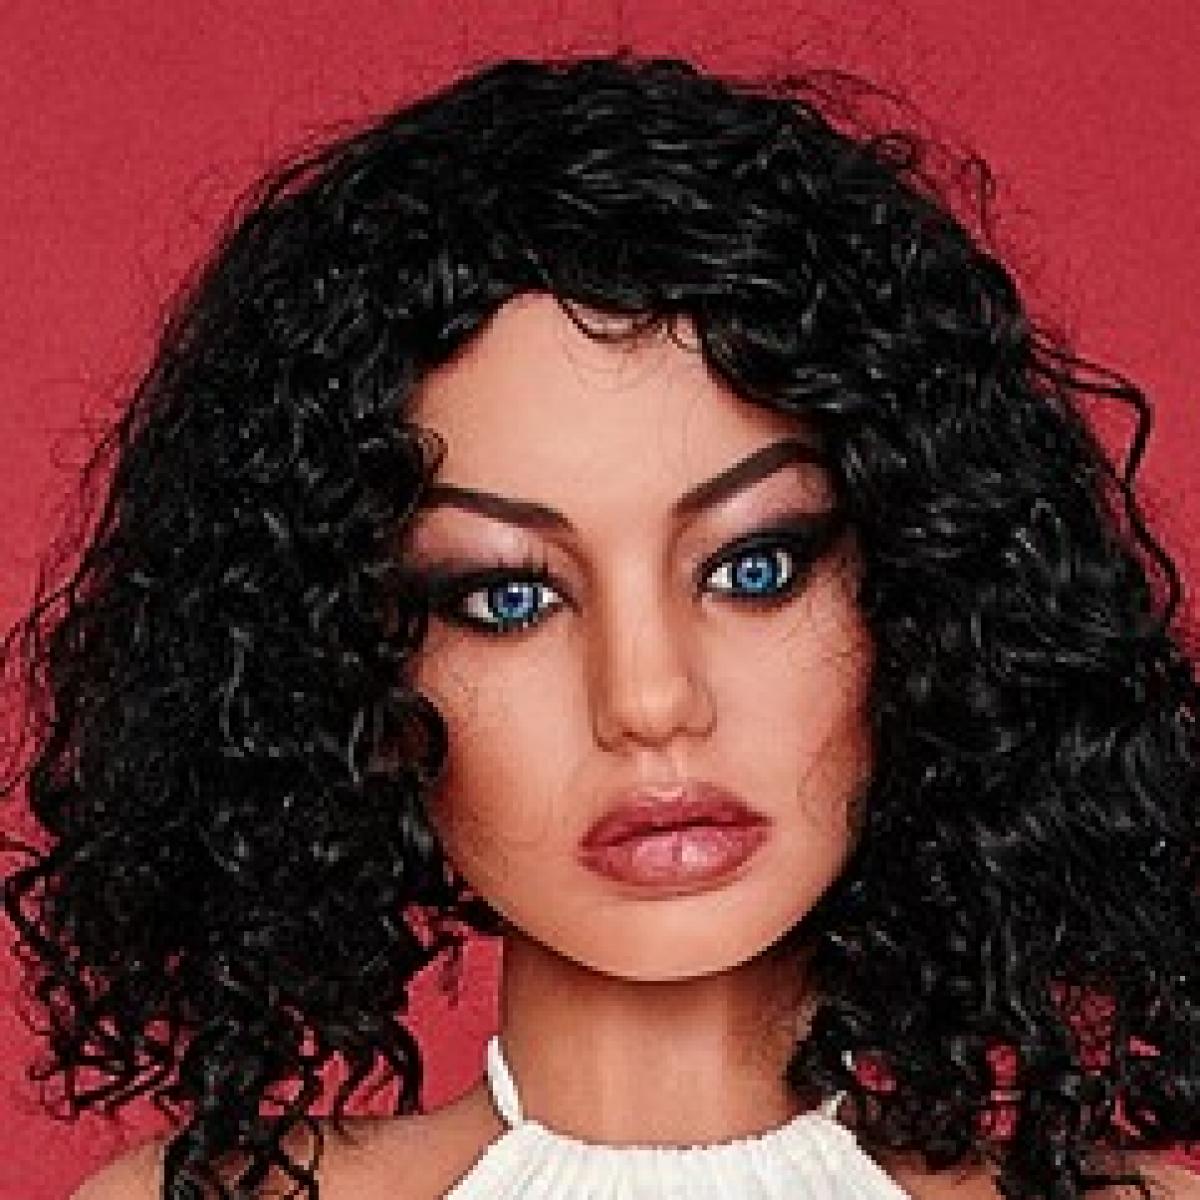 Neodoll Racy Tracy - Sex Doll Head - M16 Compatible - Brown